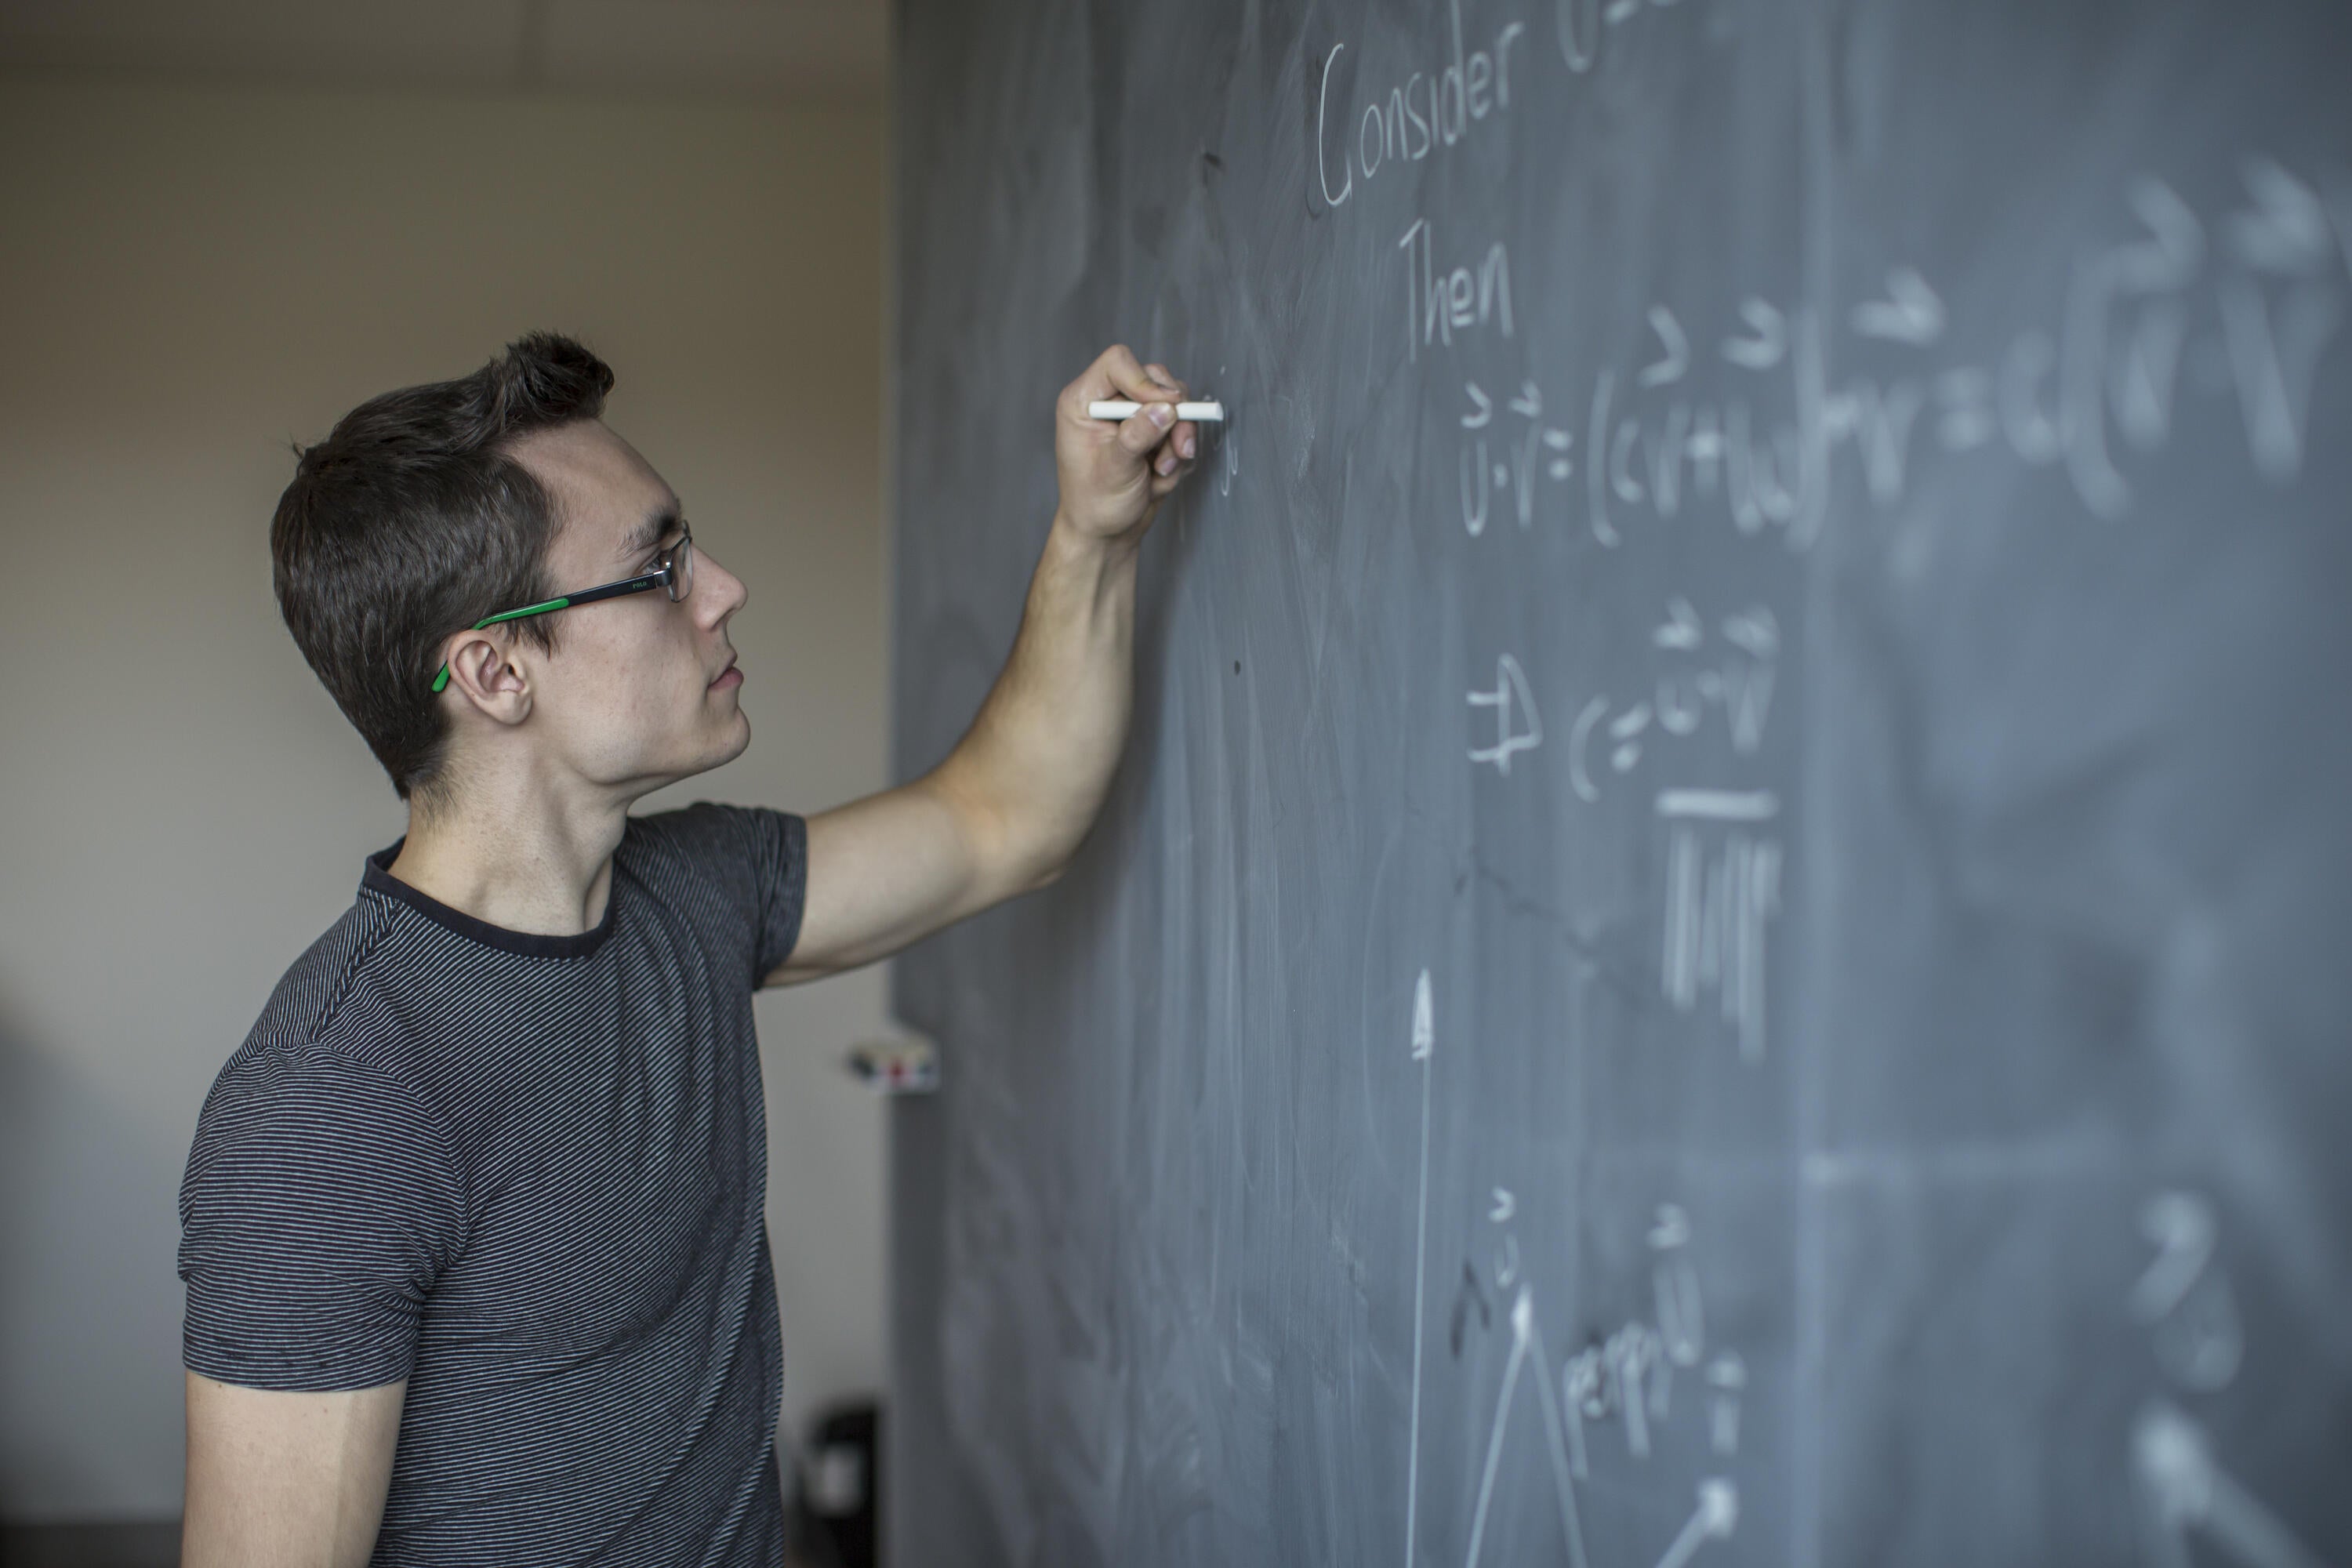 A students using chalk to write out math equations on a chalkboard.